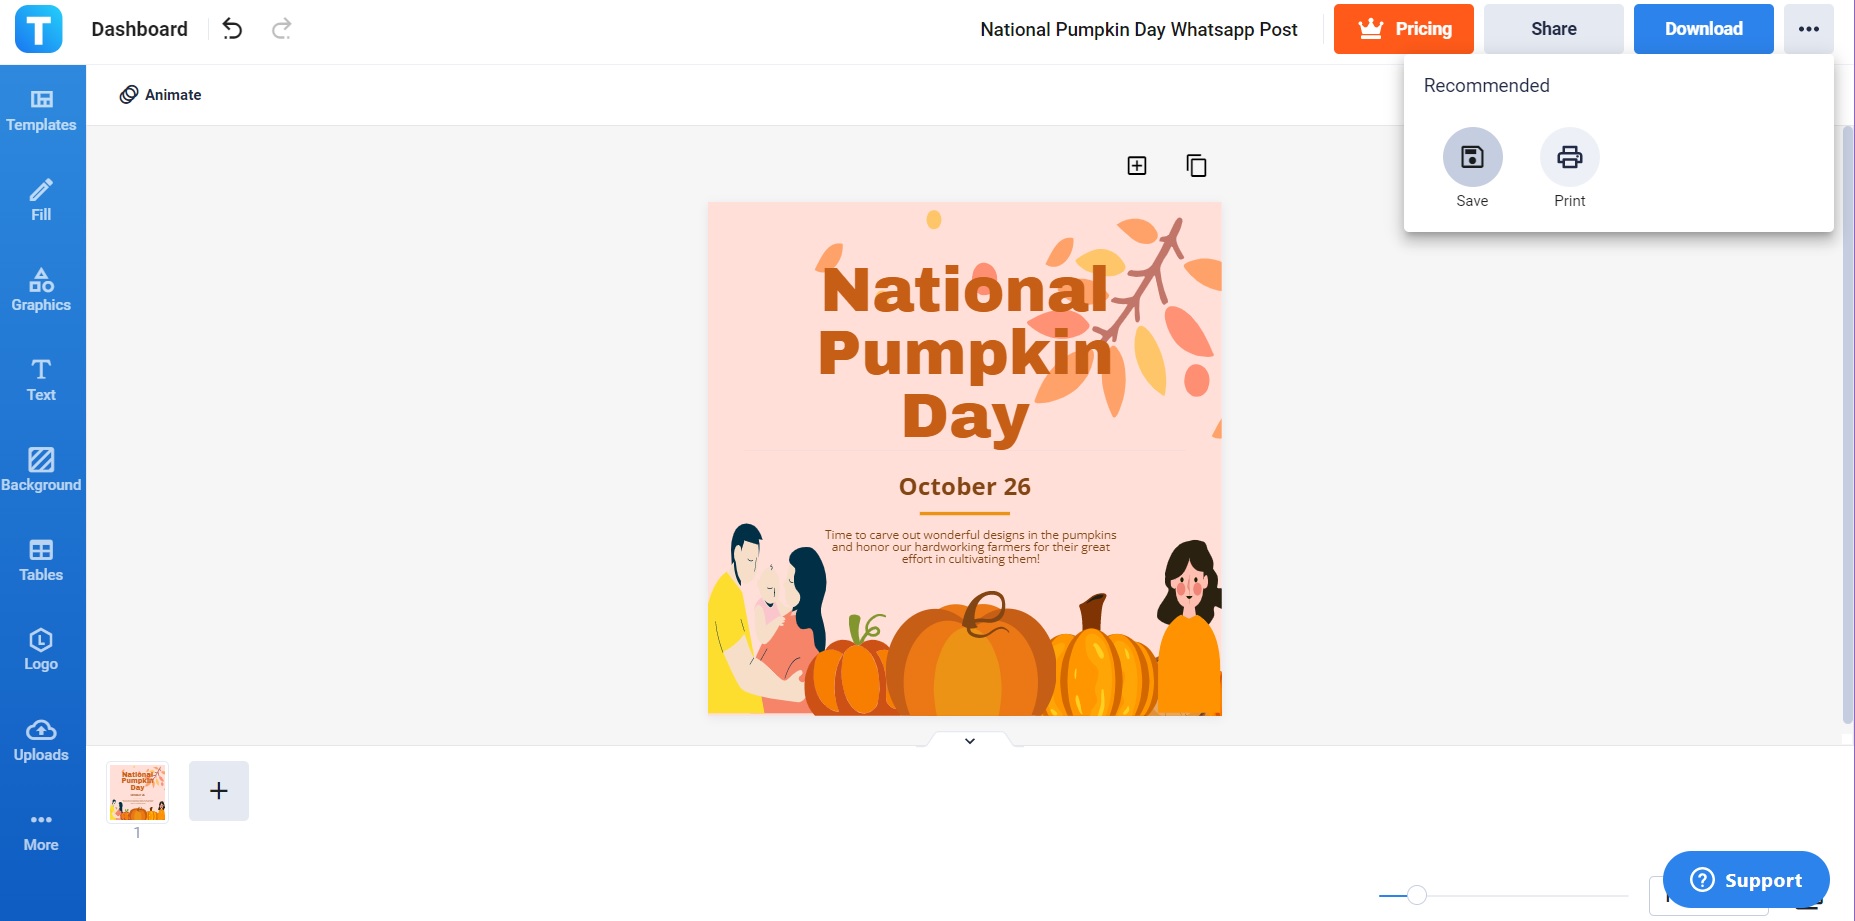 save and upload your new whatsapp post for national pumpkin day